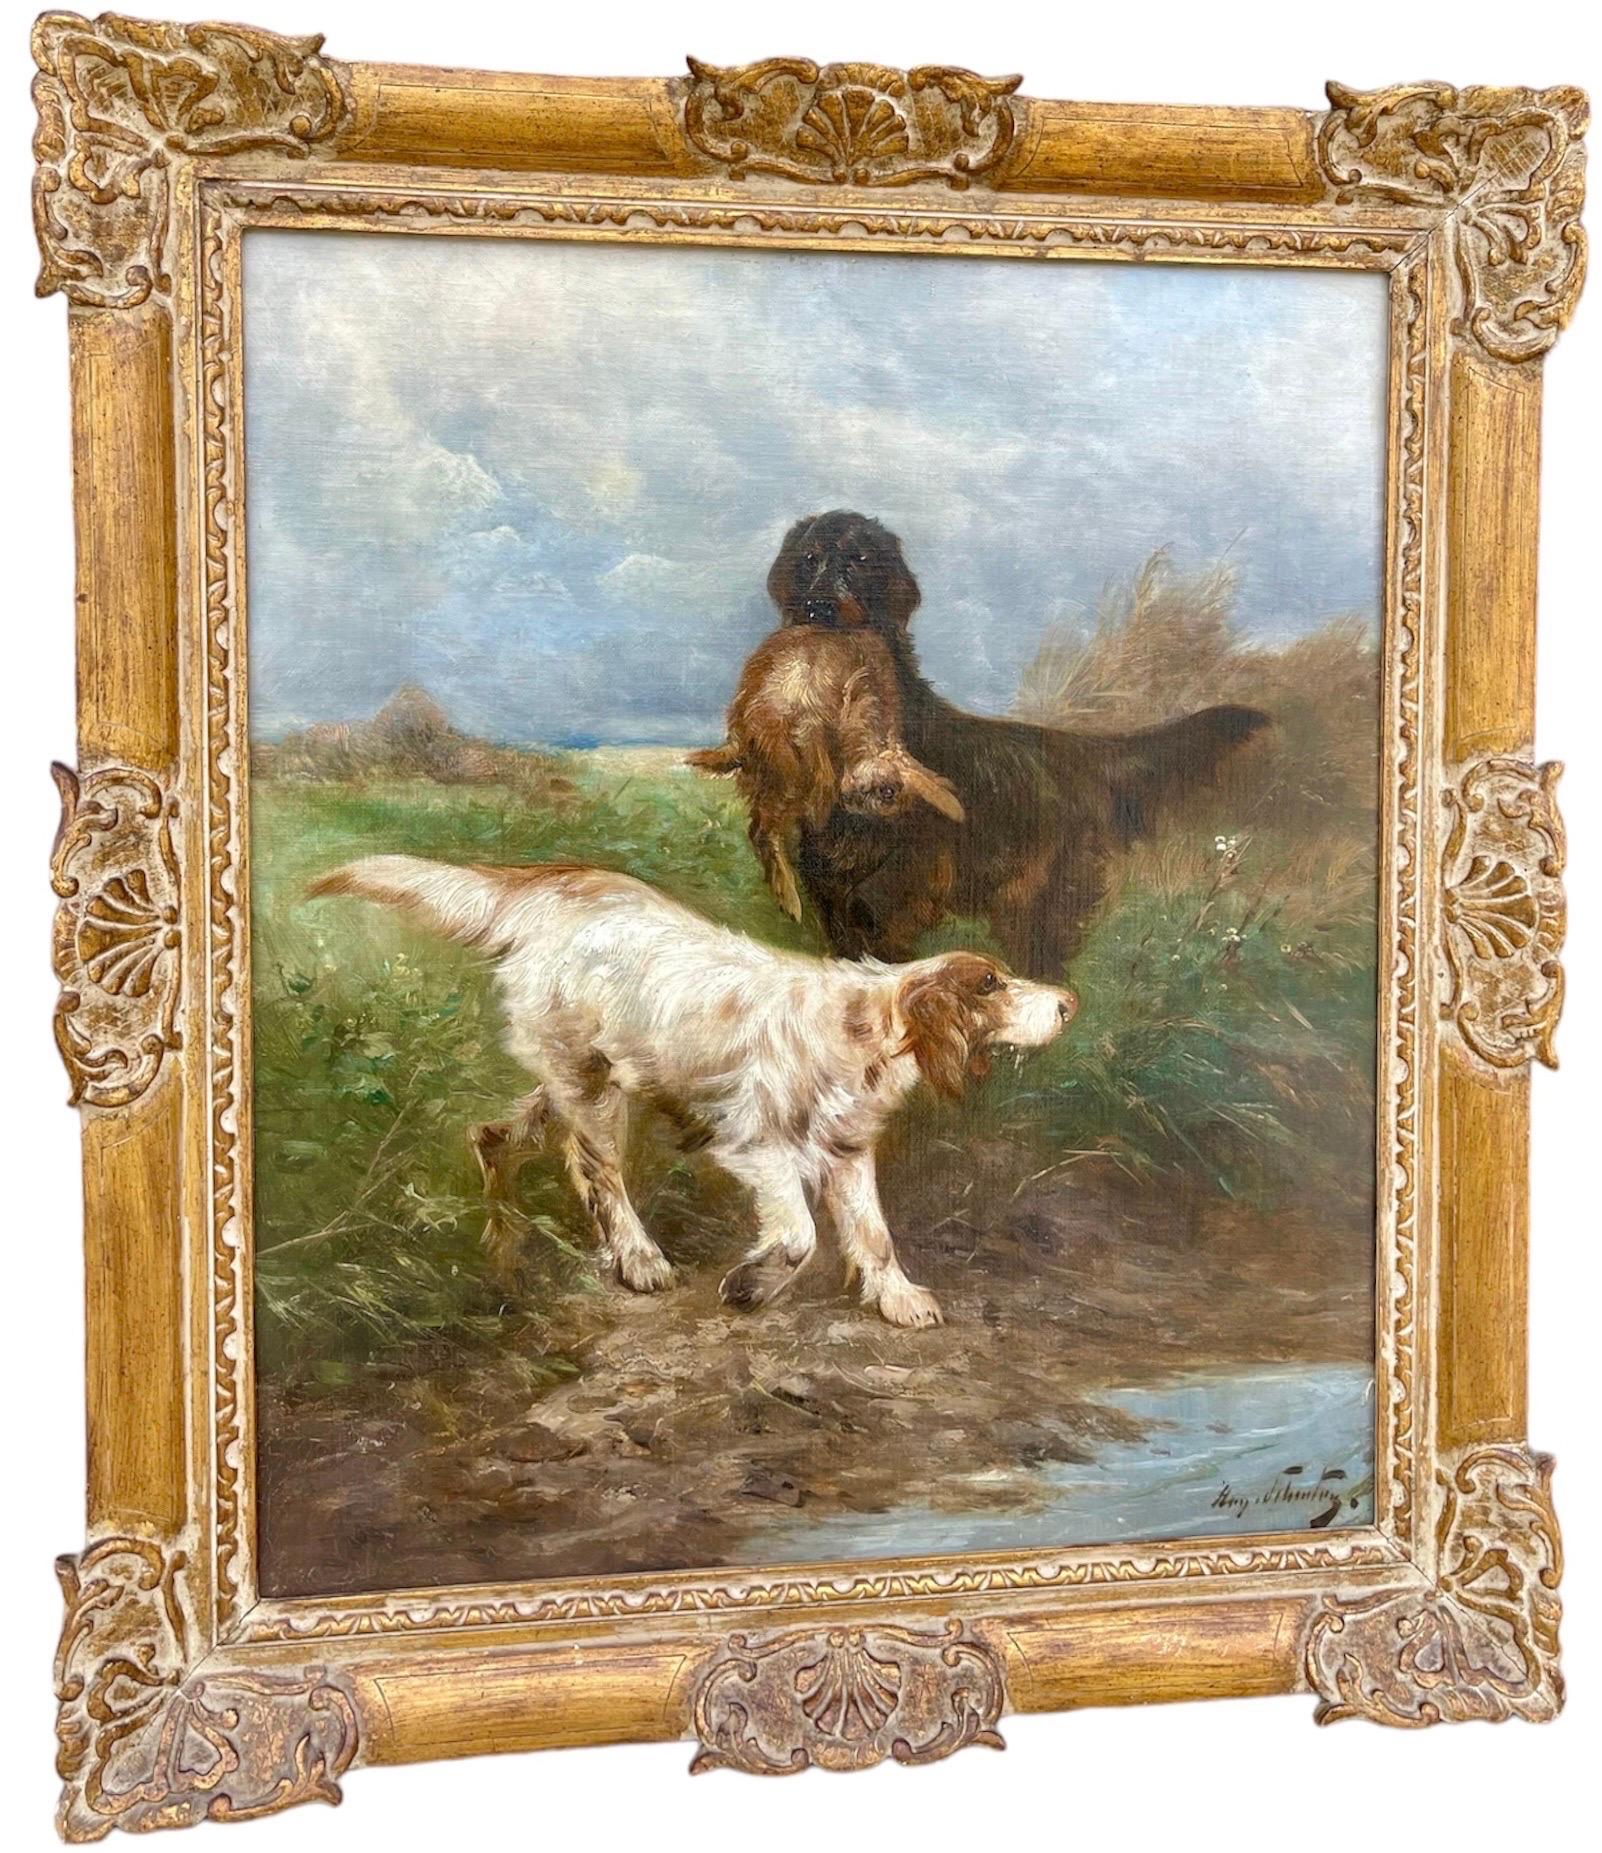 19th century Hunting scene - Setter dogs with their prey in a landscape - Hunt  5